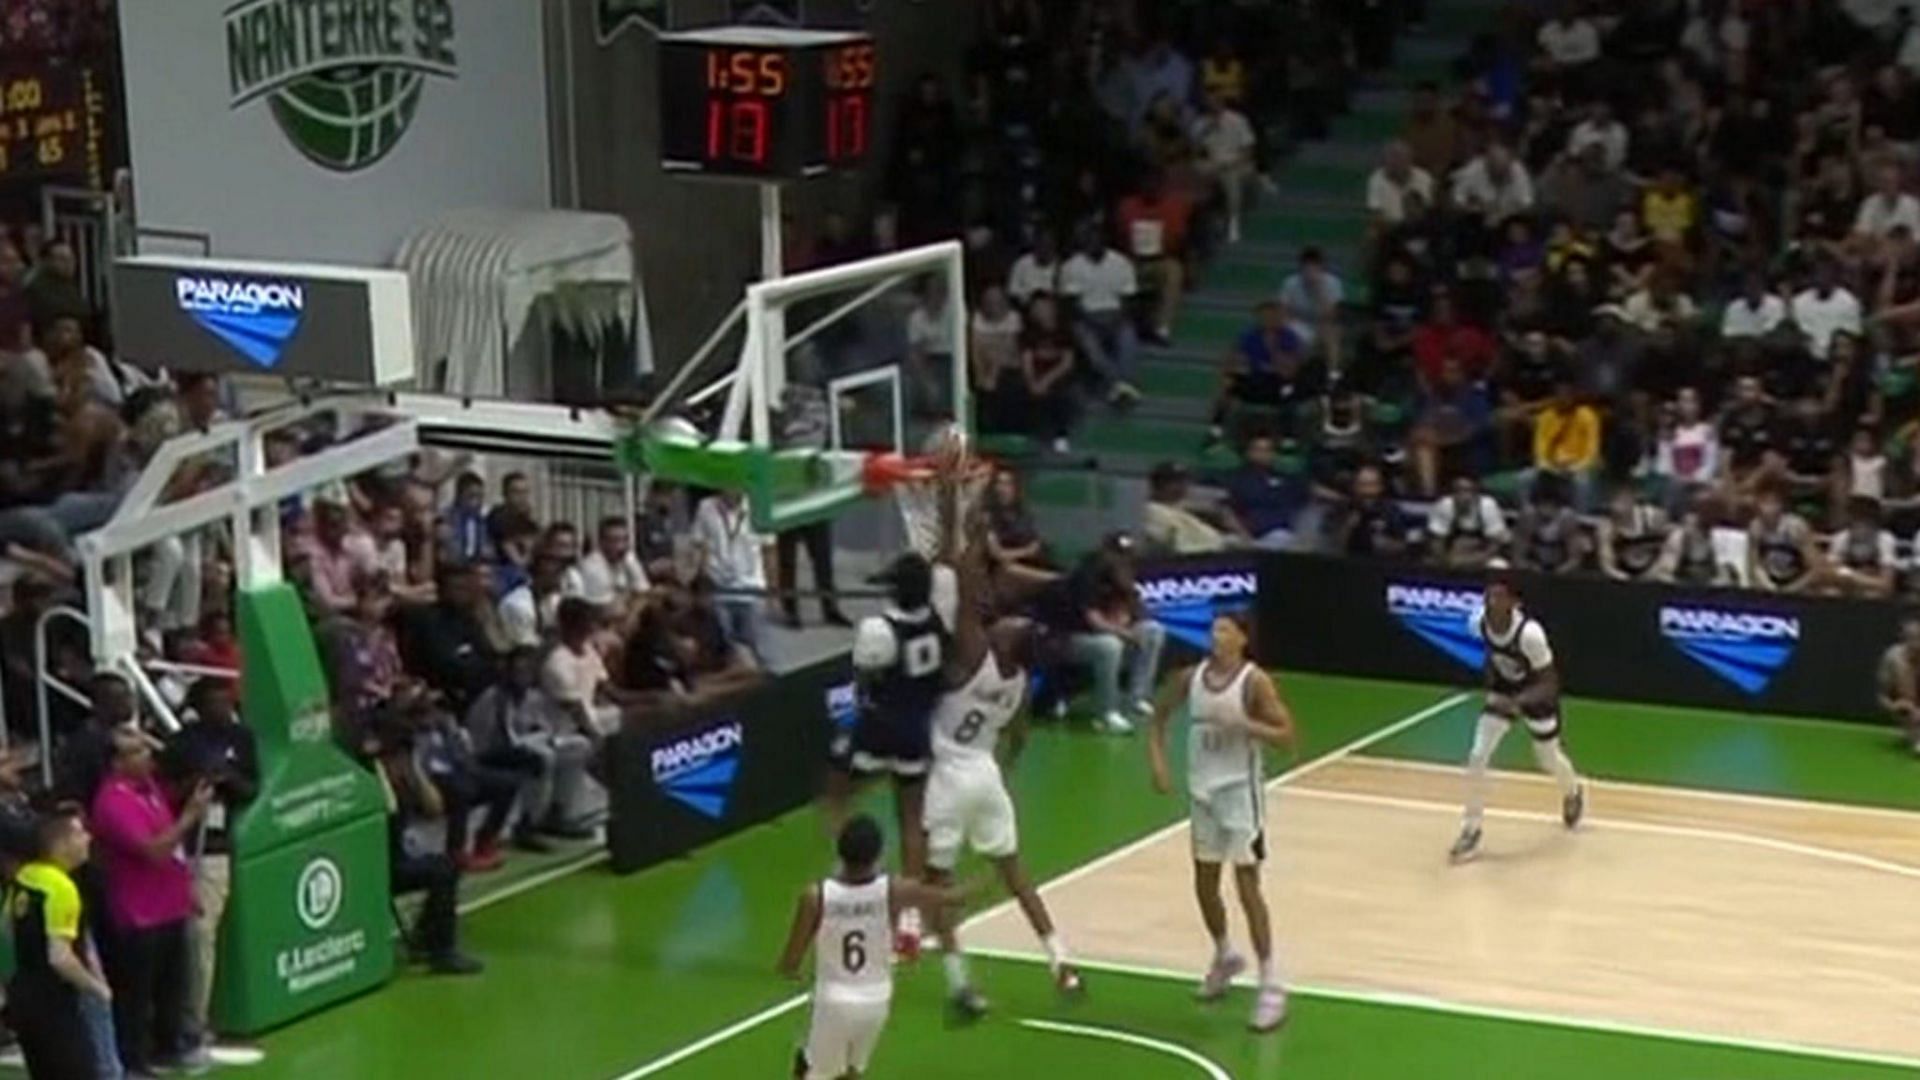 Bronny James posterized a member of the French Under-10 team in an AAU exhibition game. [Photo: Adscra News]